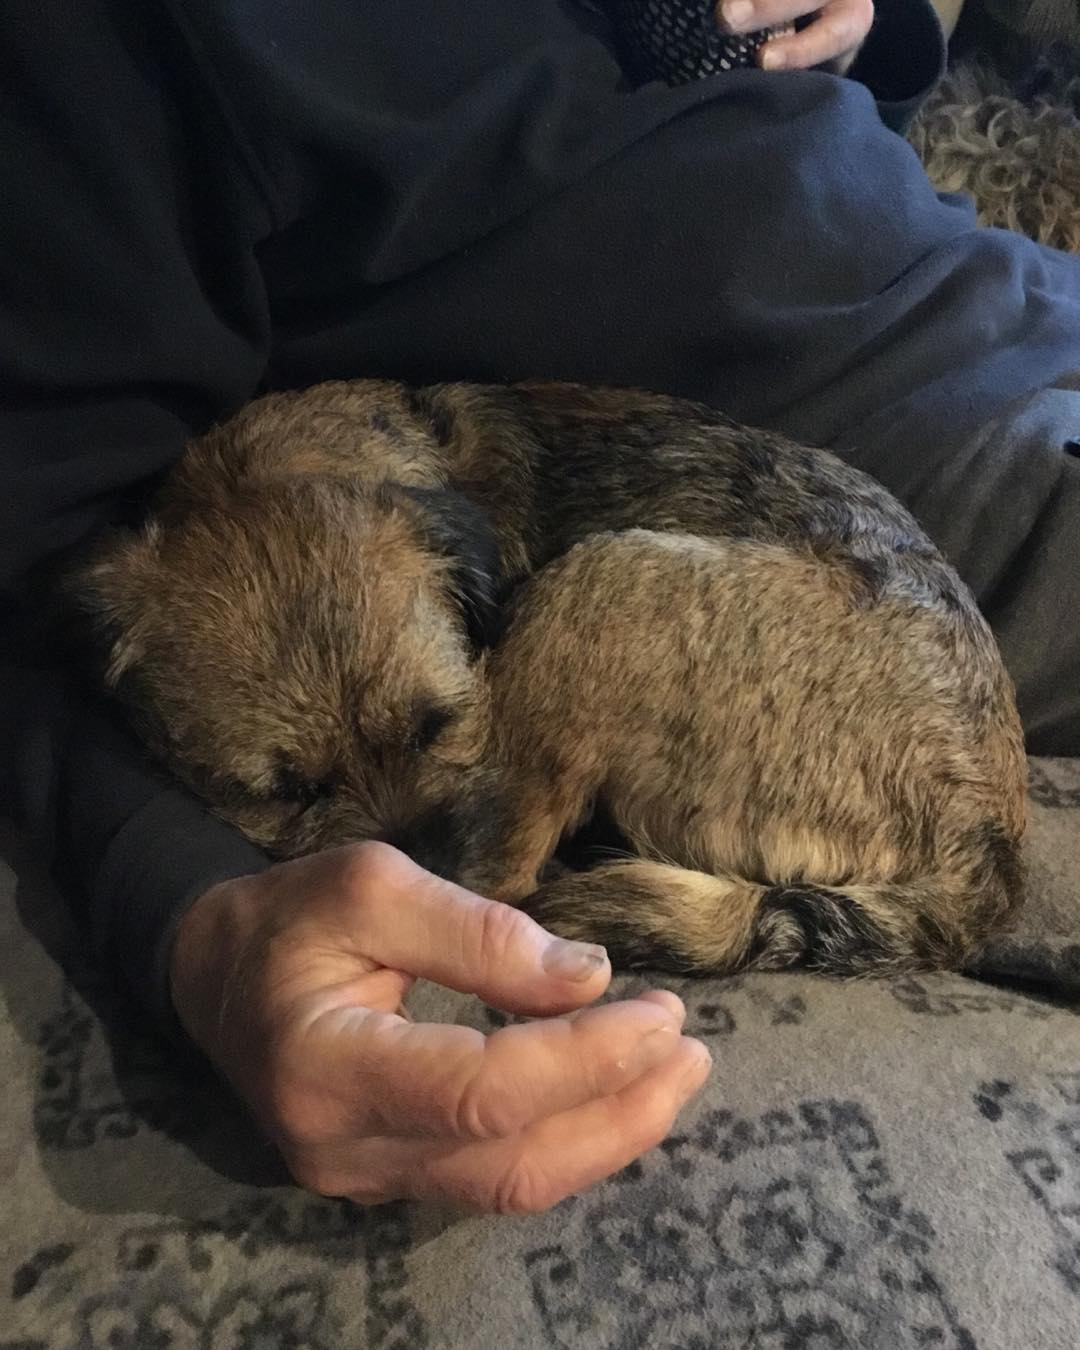 Border Terrier curled up sleeping beside a man